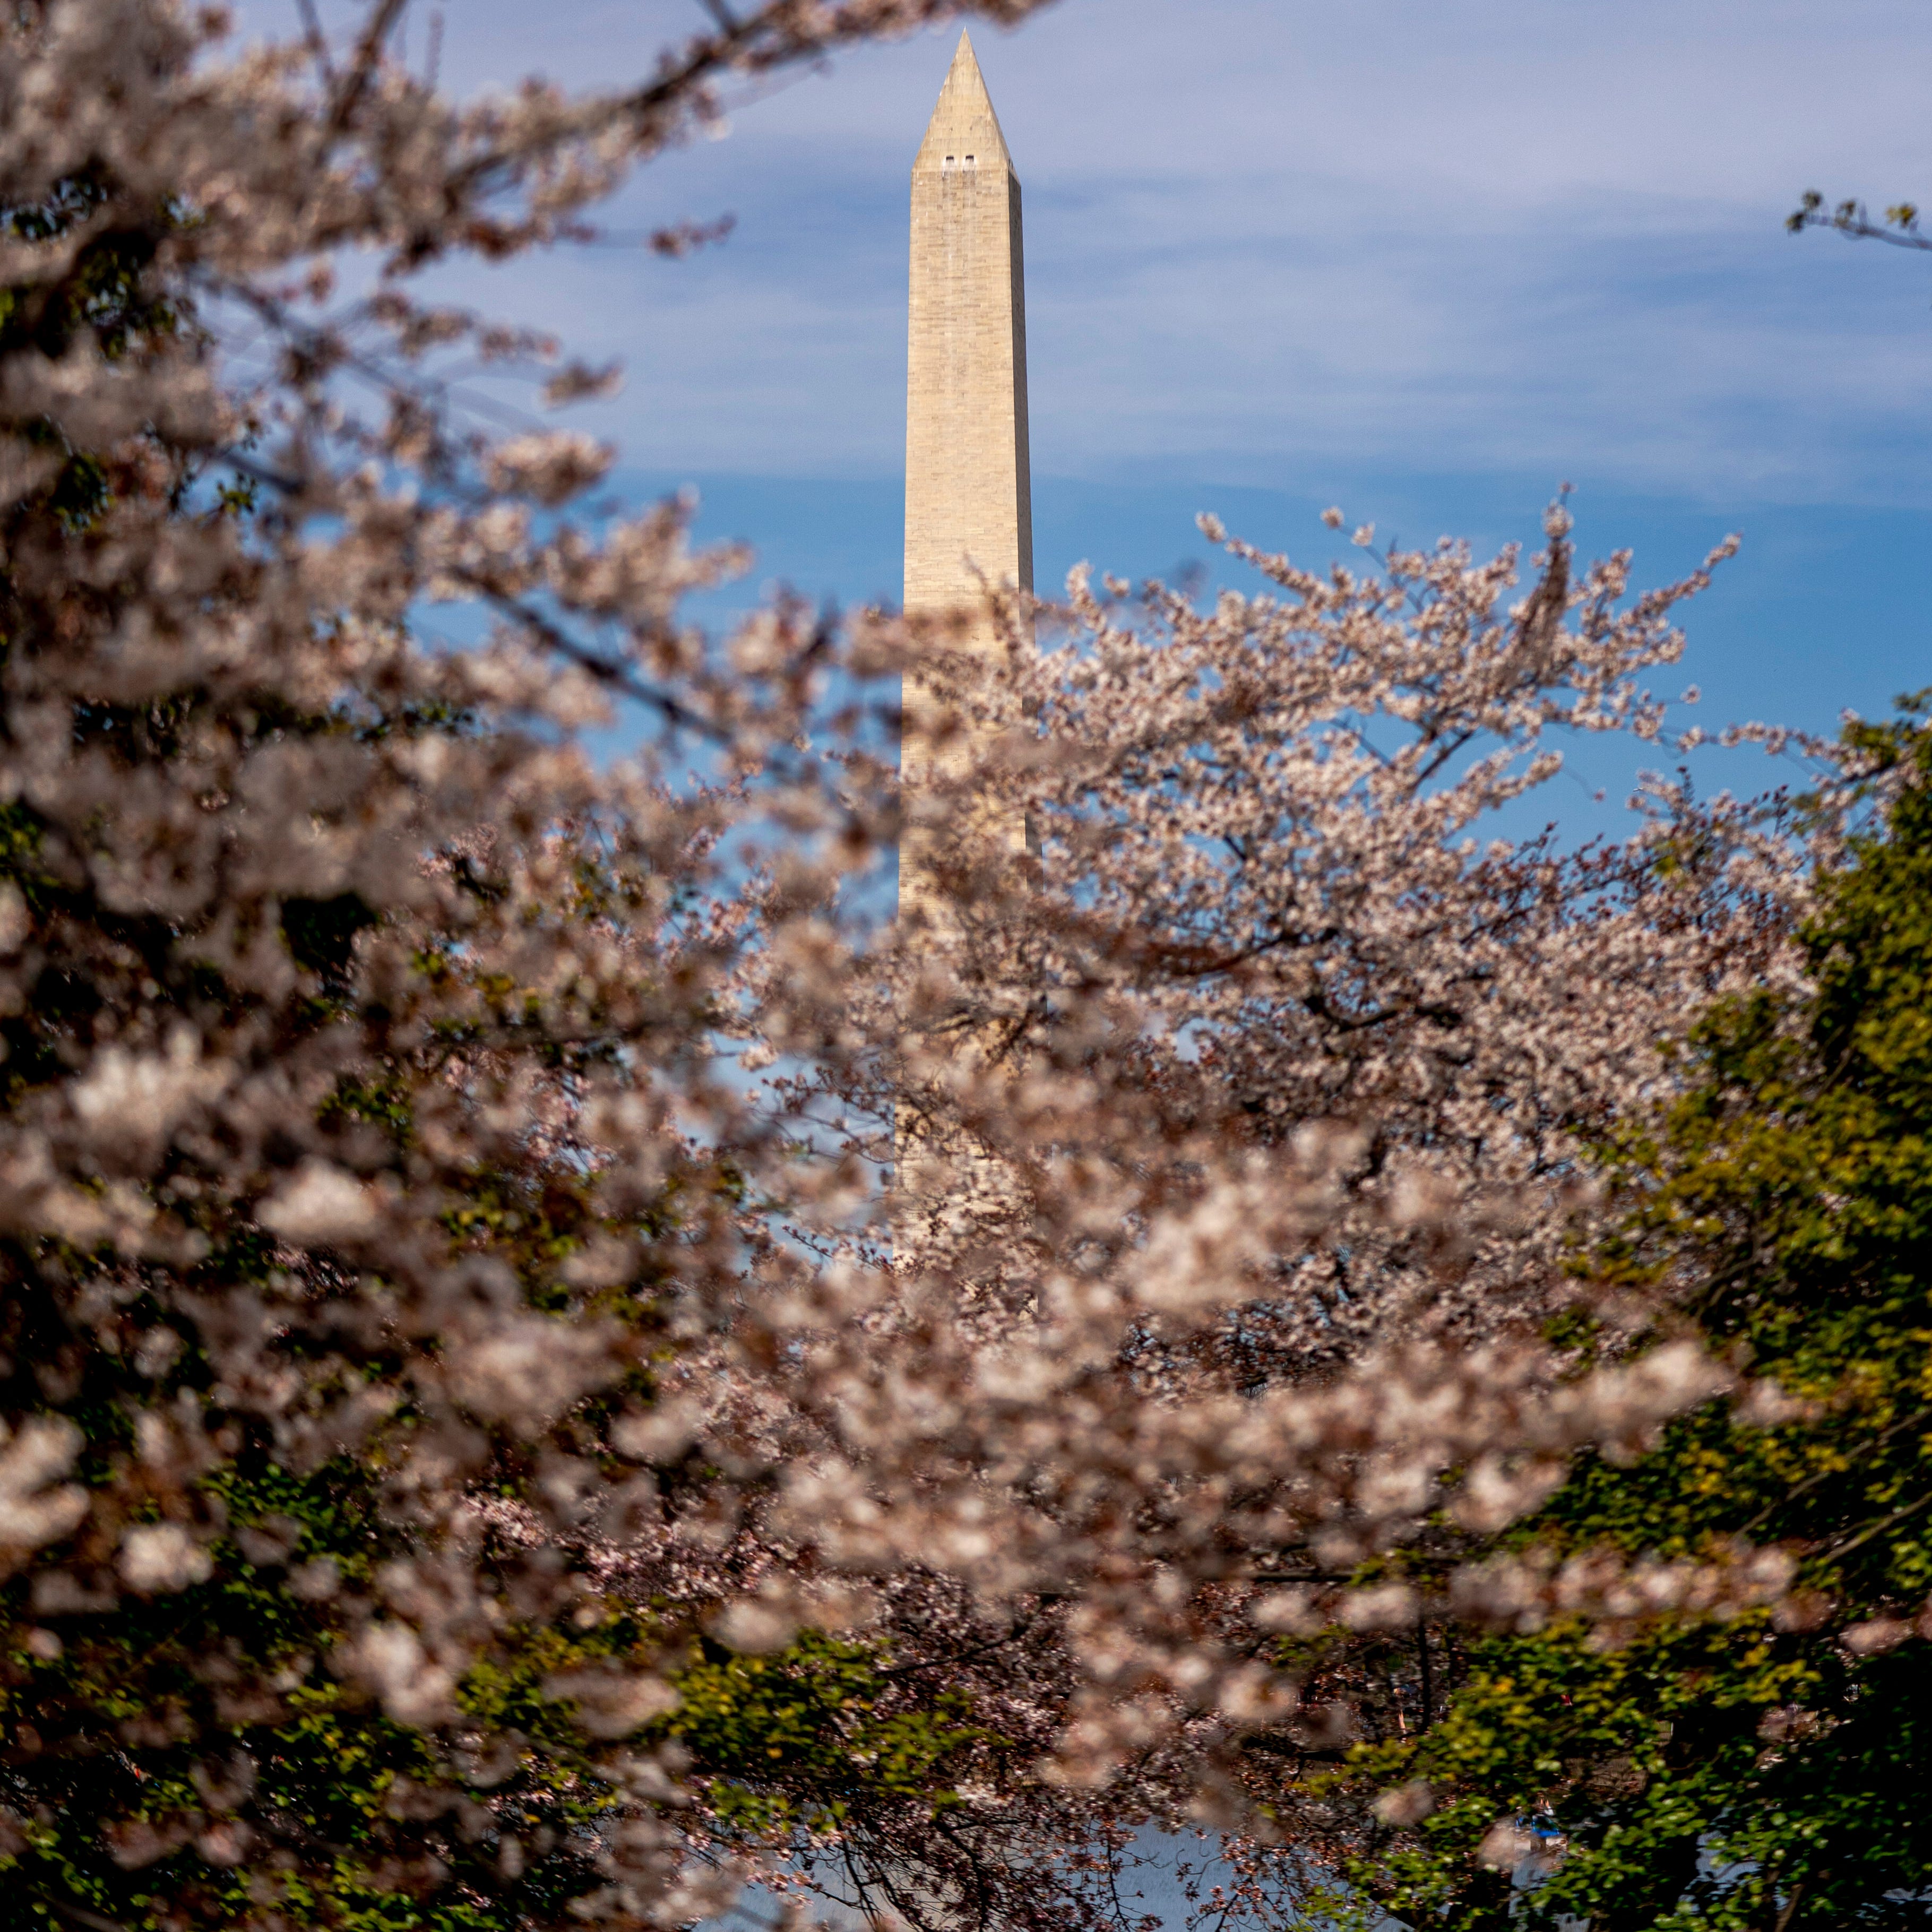 The Washington Monument is visible as visitors walk through cherry blossoms, which enter their peak bloom this week in Washington, Tuesday, March 21, 2023.